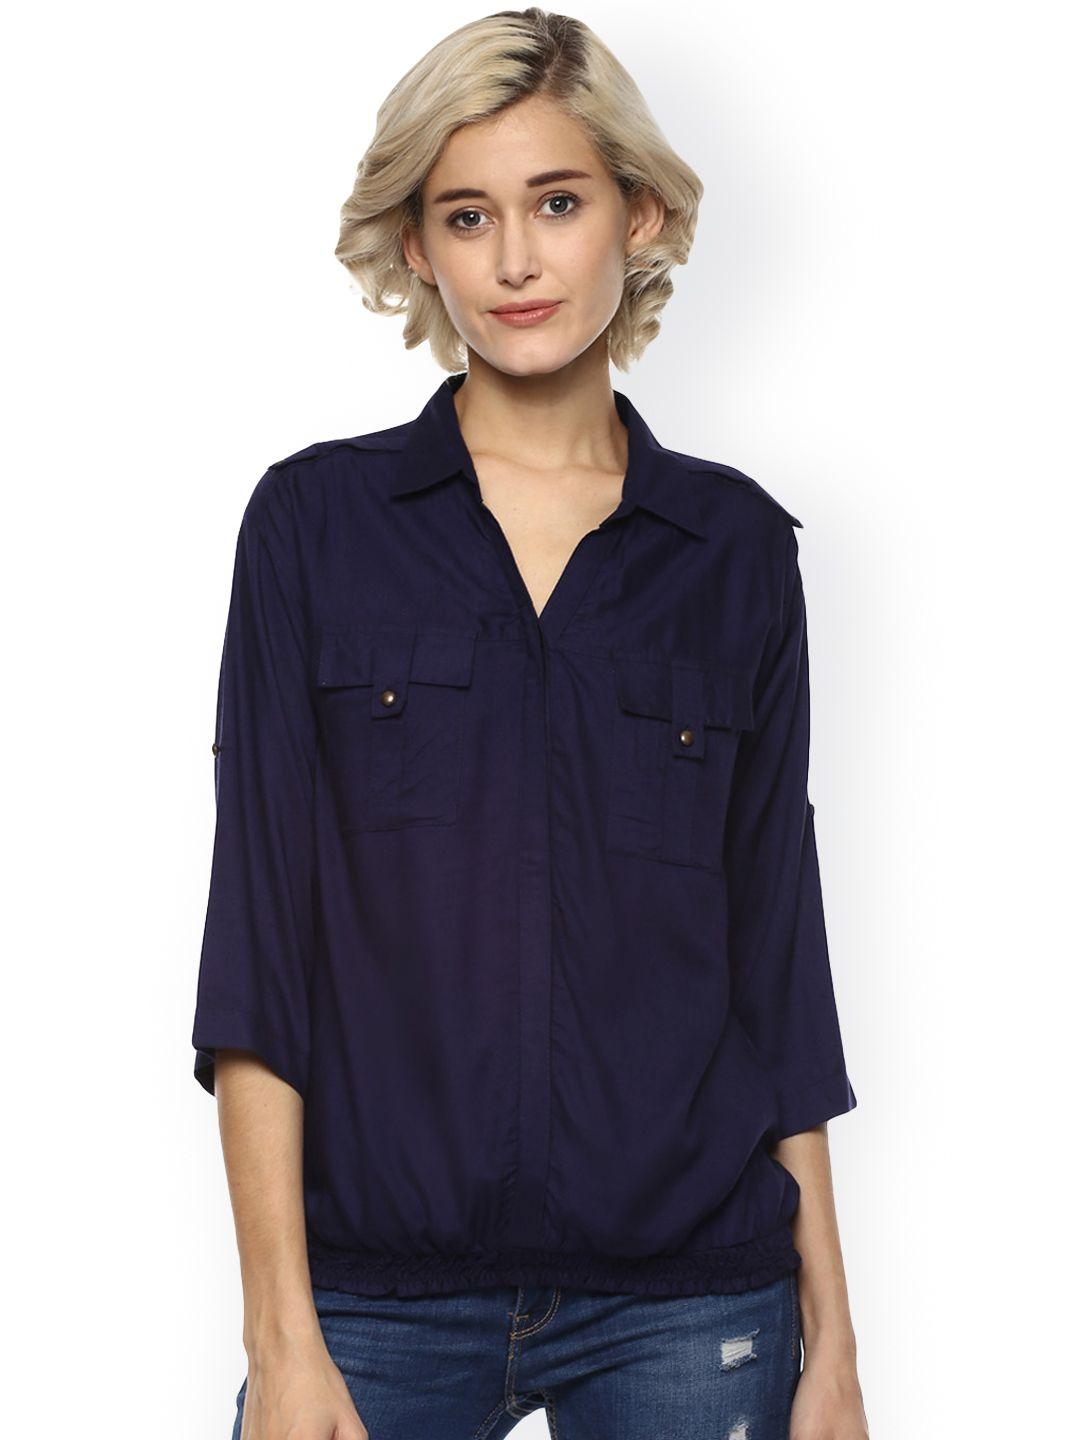 harpa women navy blue solid shirt-style top